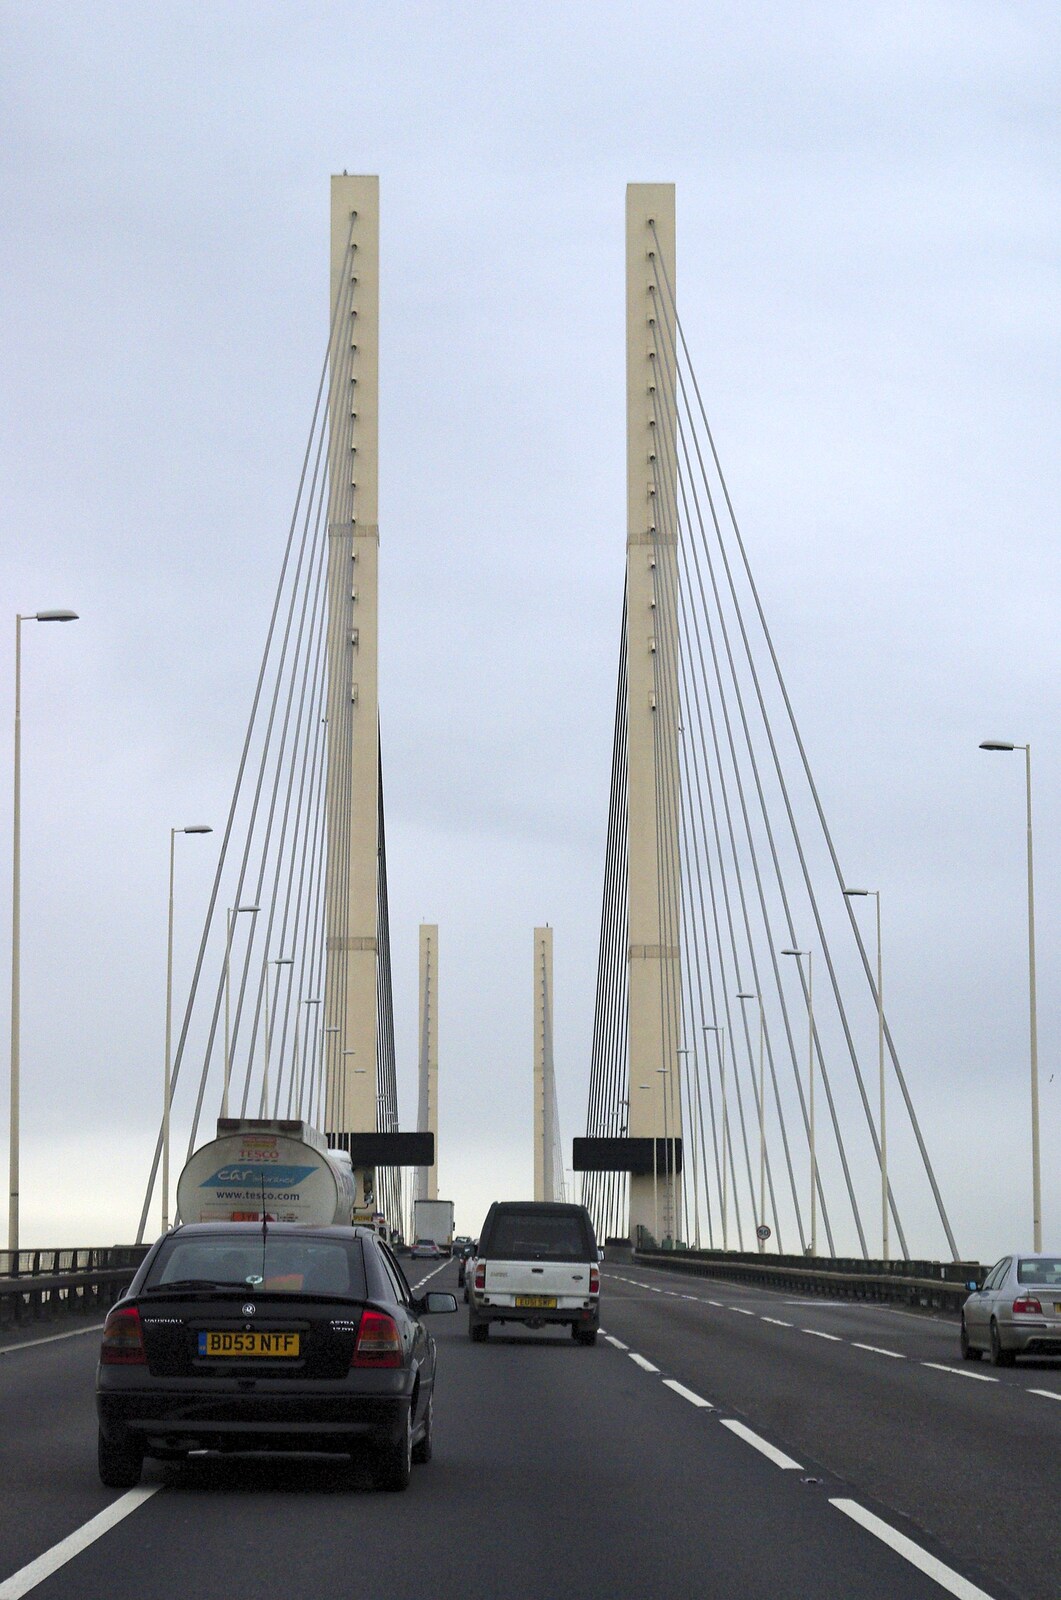 The QE2 bridge on the Dartford Crossing from The BBs On Tour, Gatwick Copthorne, West Sussex - 24th November 2007